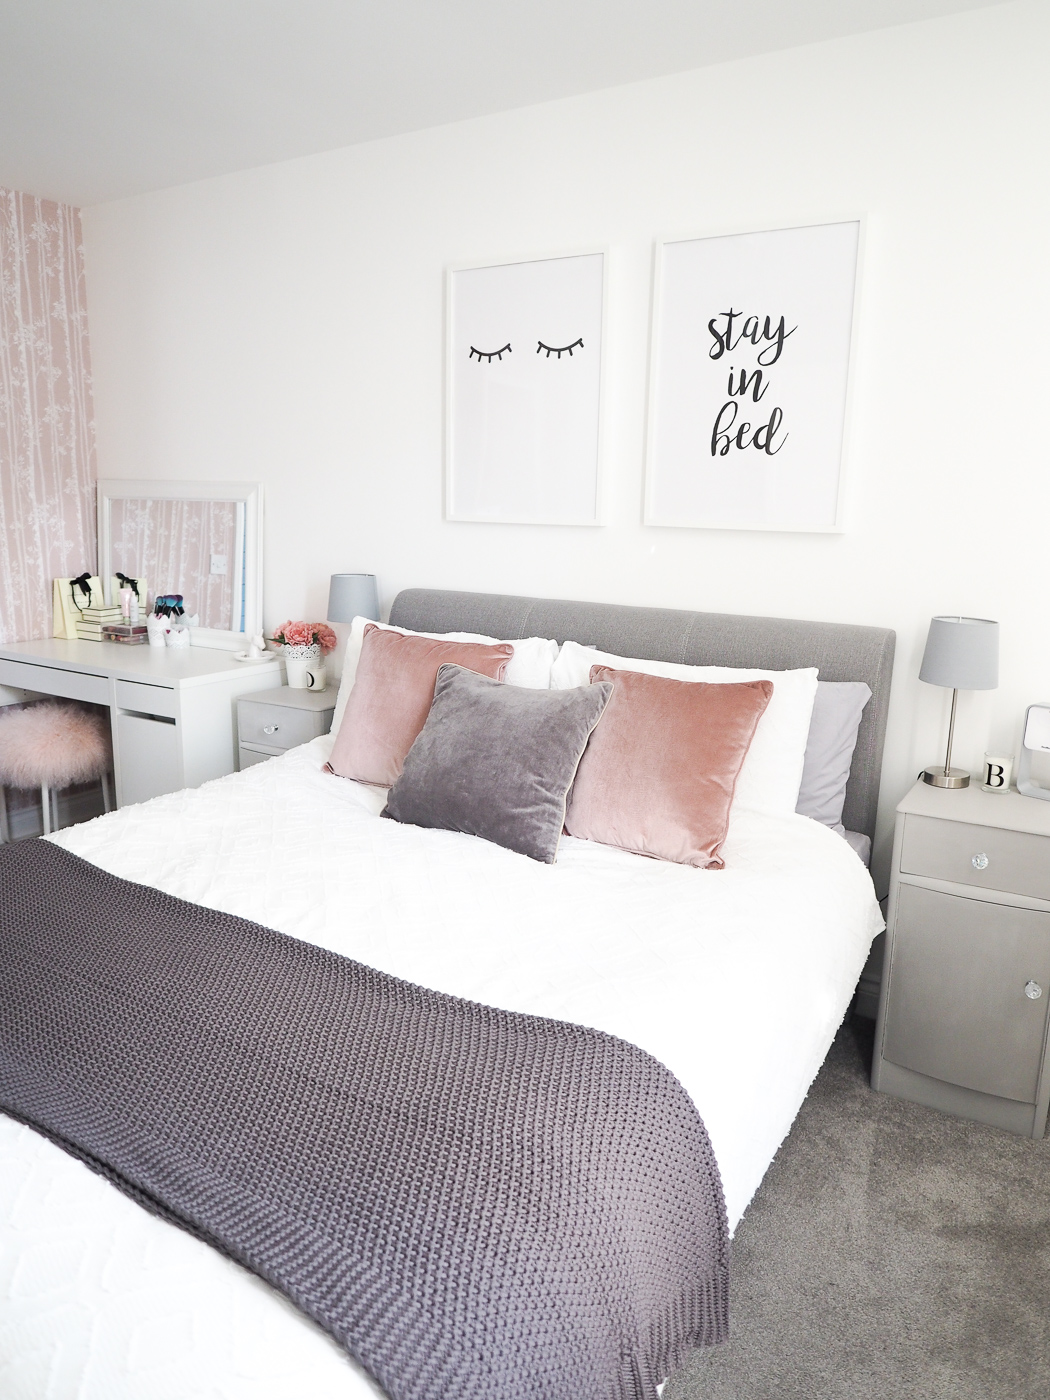 Bedroom Tour Pink and Grey Bedroom Decor Bang on Style